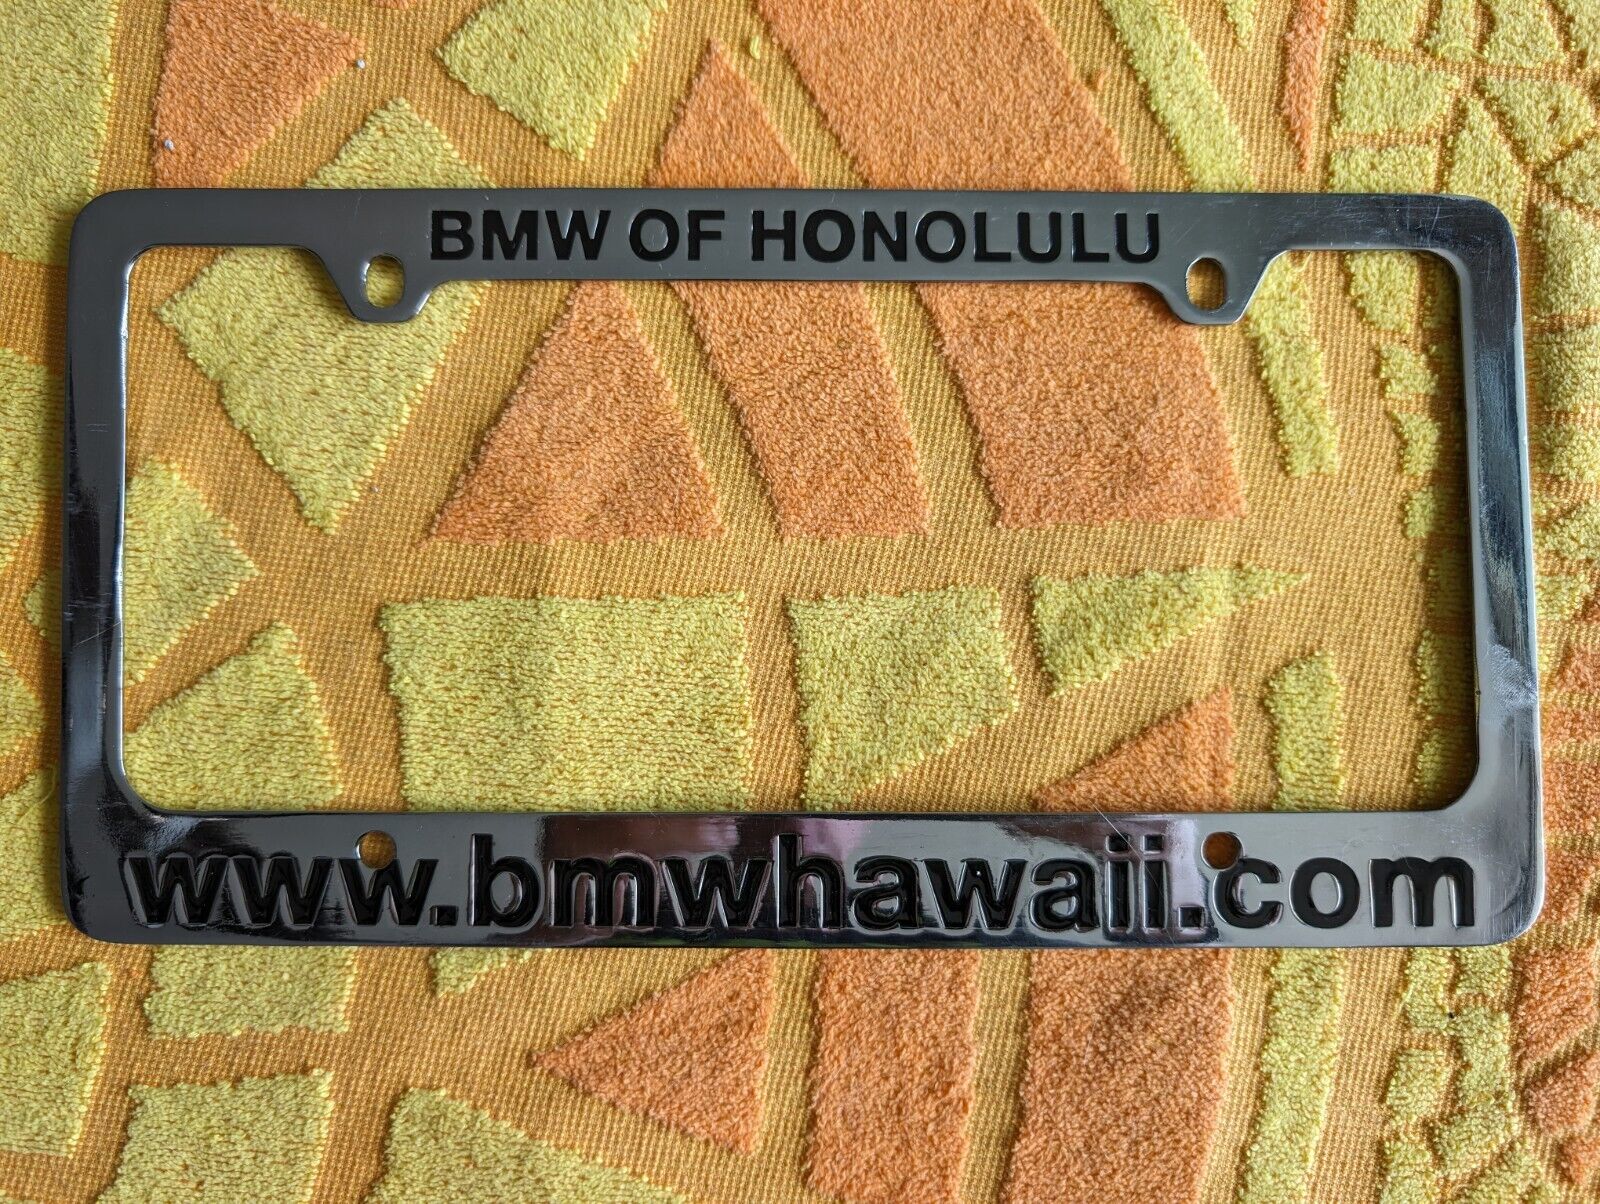 World Famous Bmw Of Honolulu License Plate Frame. Metal. New.